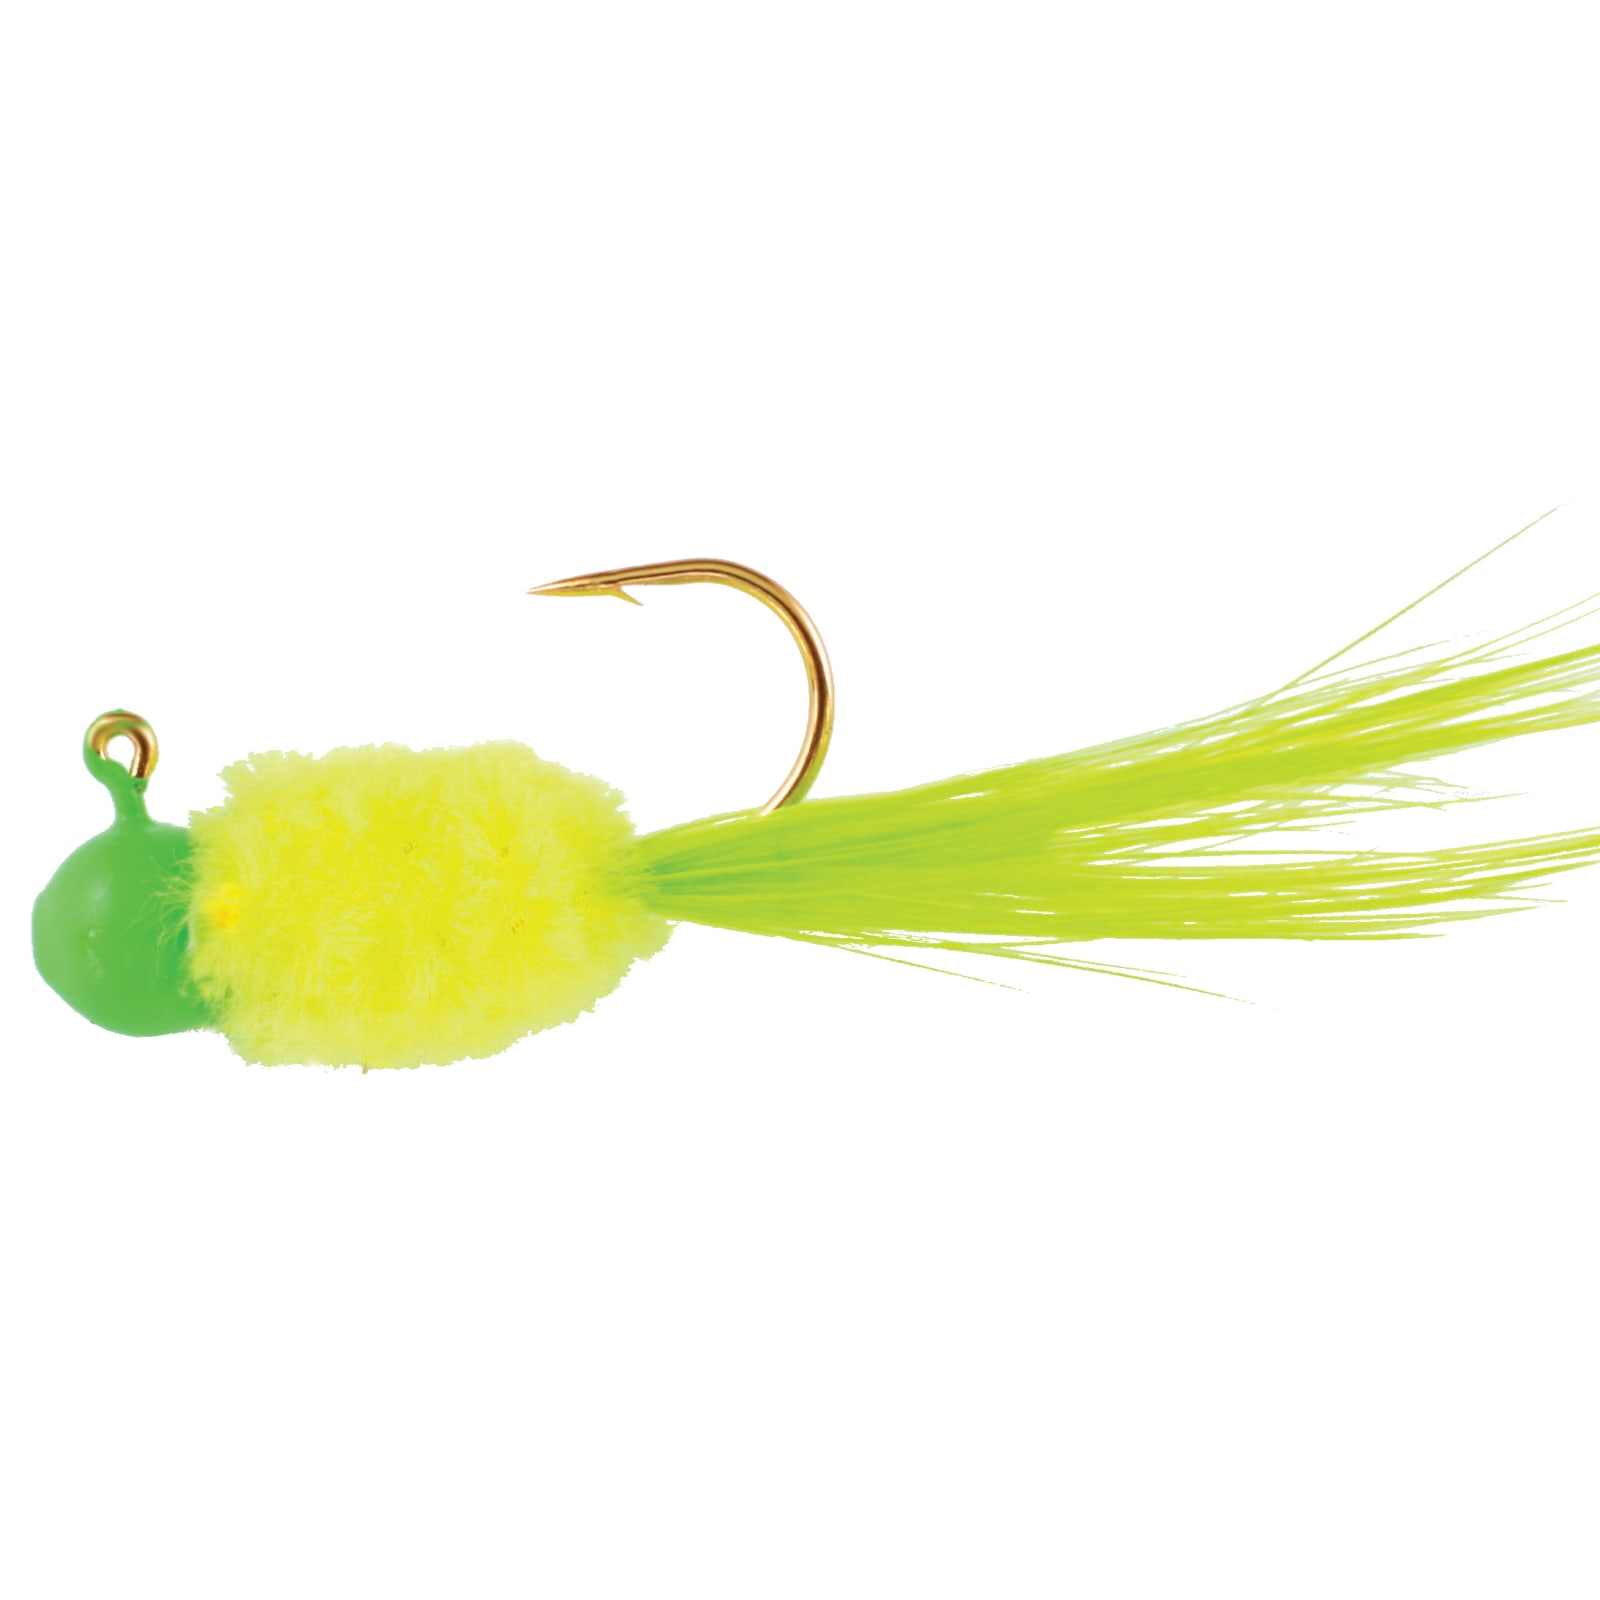 Lime Chartreuse Lime Slab Caller Jig by Team Crappie at Fleet Farm